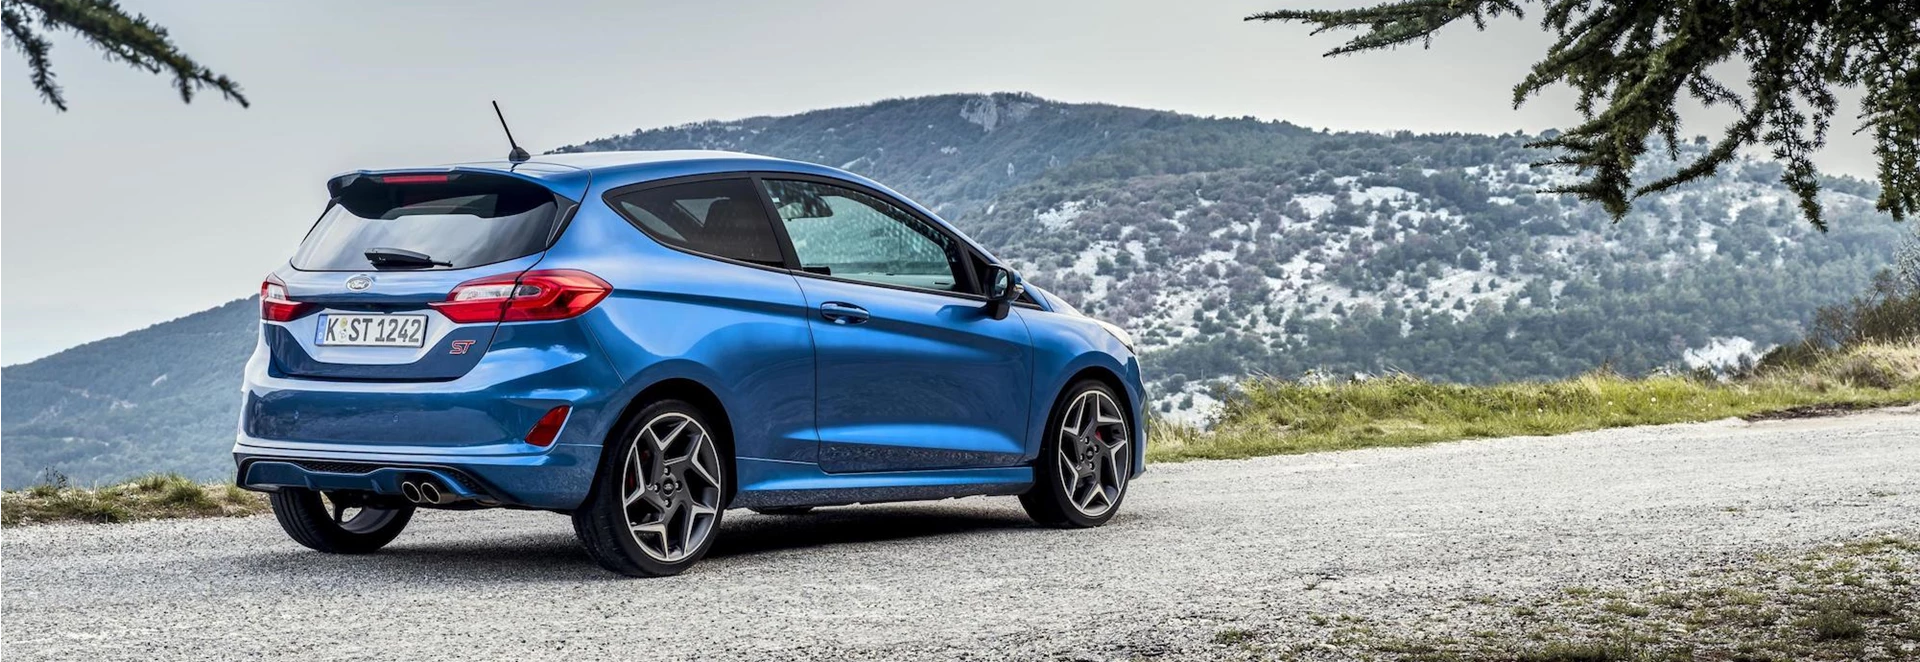 The best hot hatches of 2018